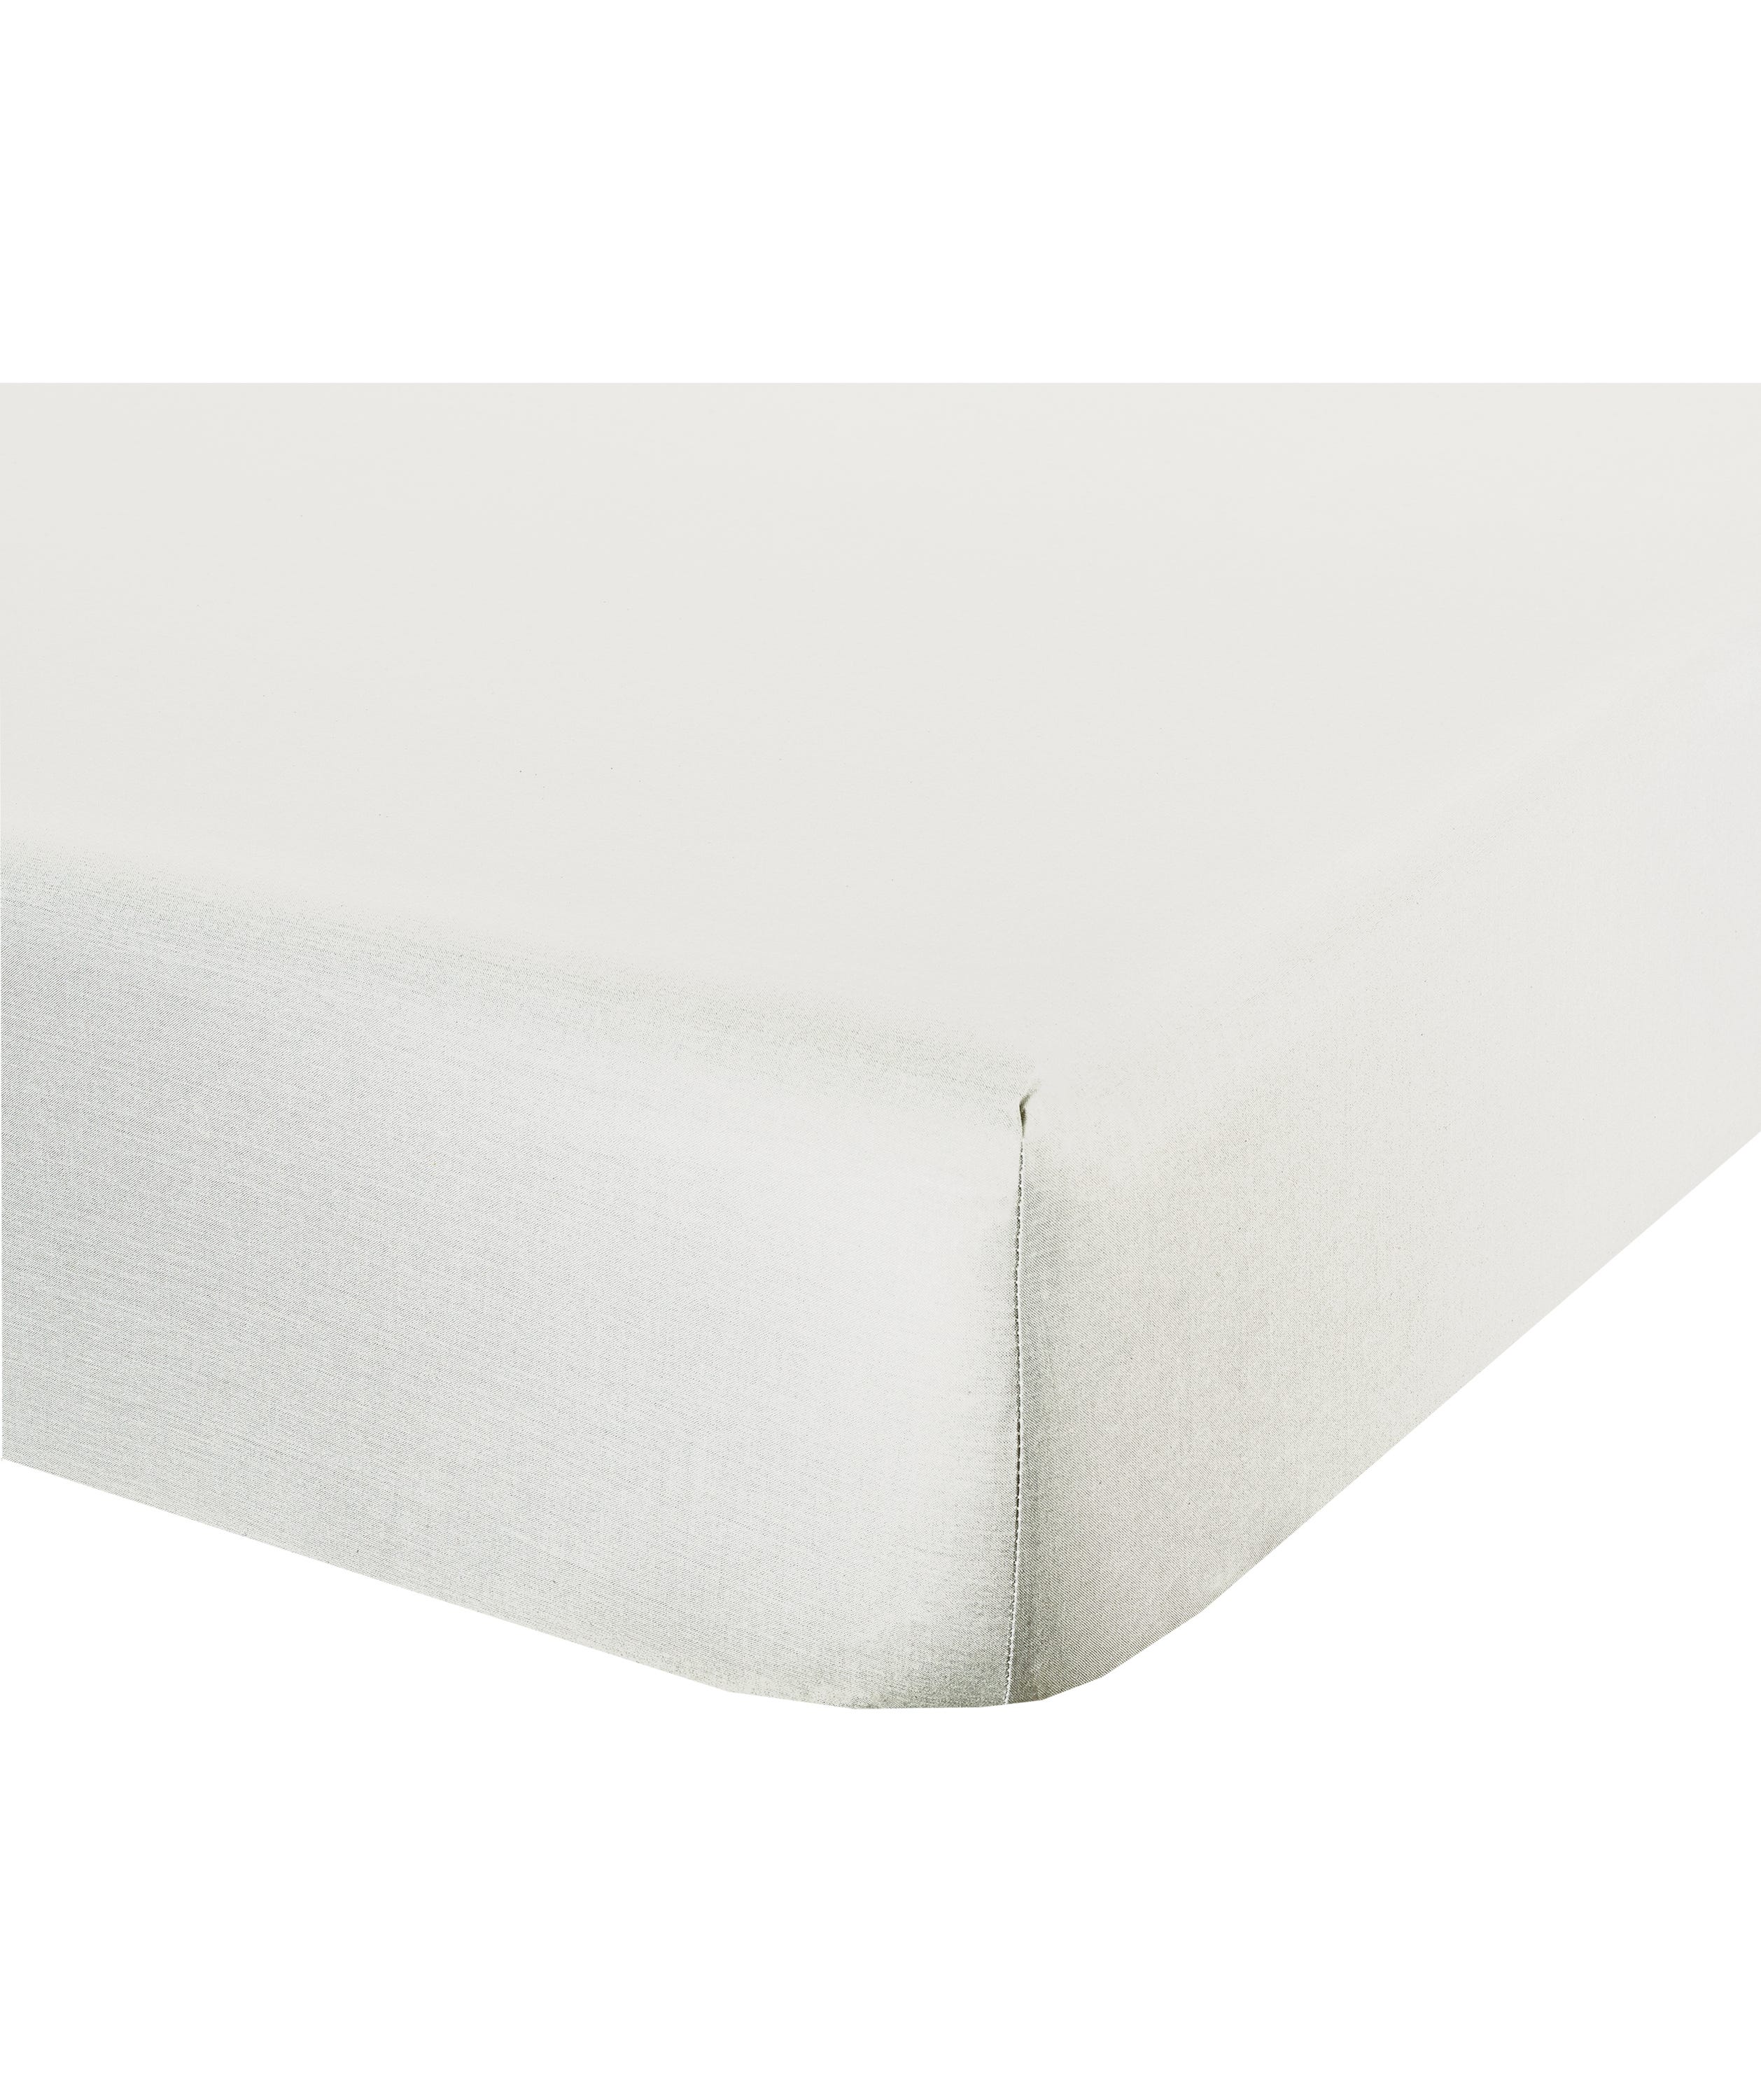 Drap housse 120 X 200 X 25 CM 100% coton Made in Italy BLANC